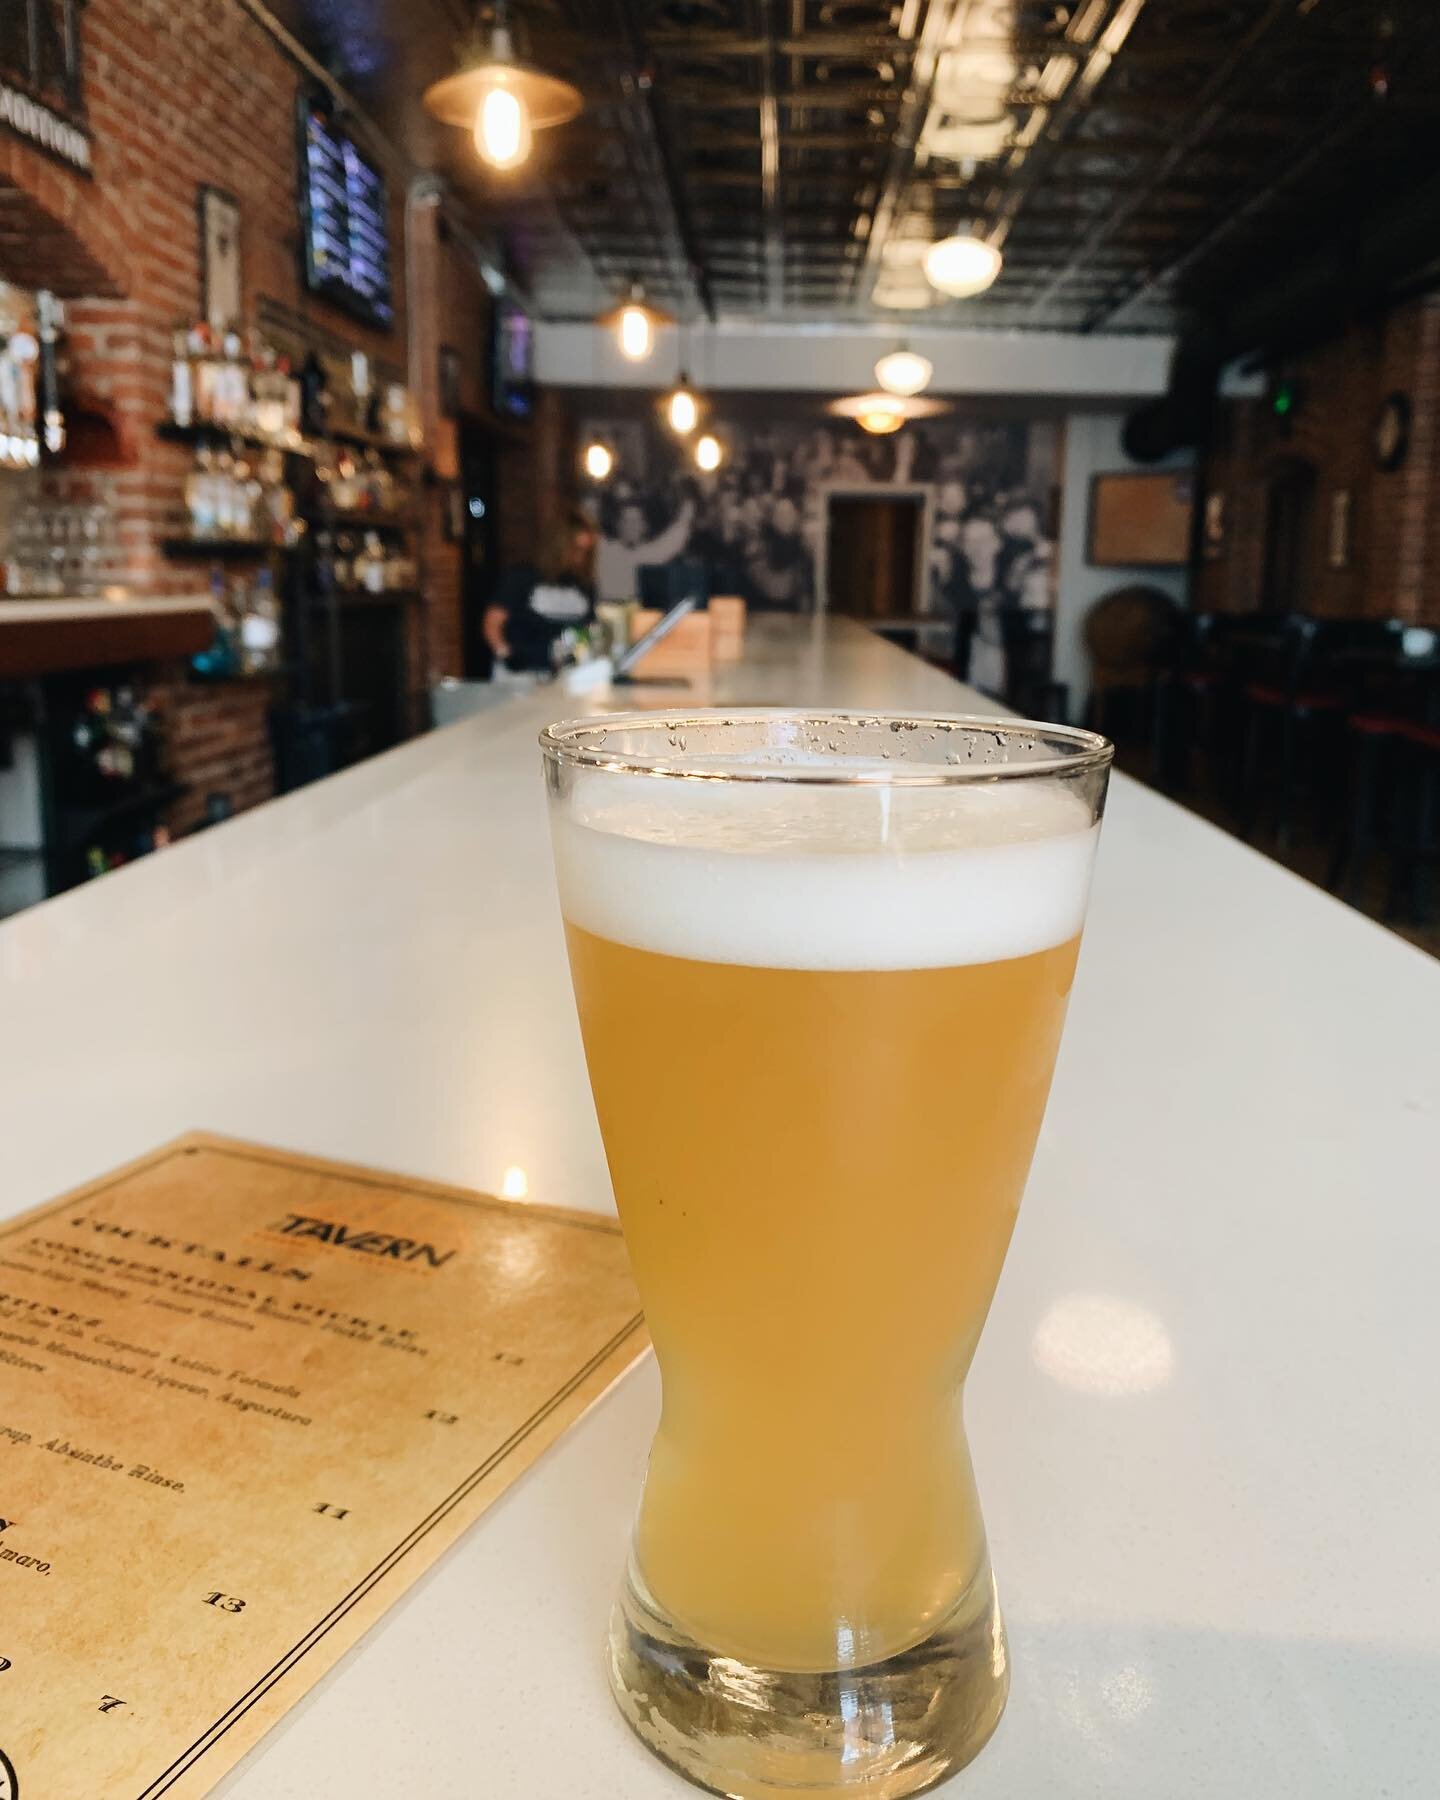 12 new drafts on tap 🙌 including our beer feature of the week - @northcountrybrewing Sour Series: Bananas Foster 🍌🍺 

&ldquo;Inspired by the classic desert of the same name, this sour was brewed with cinnamon, milk sugar and brown sugar. After fer